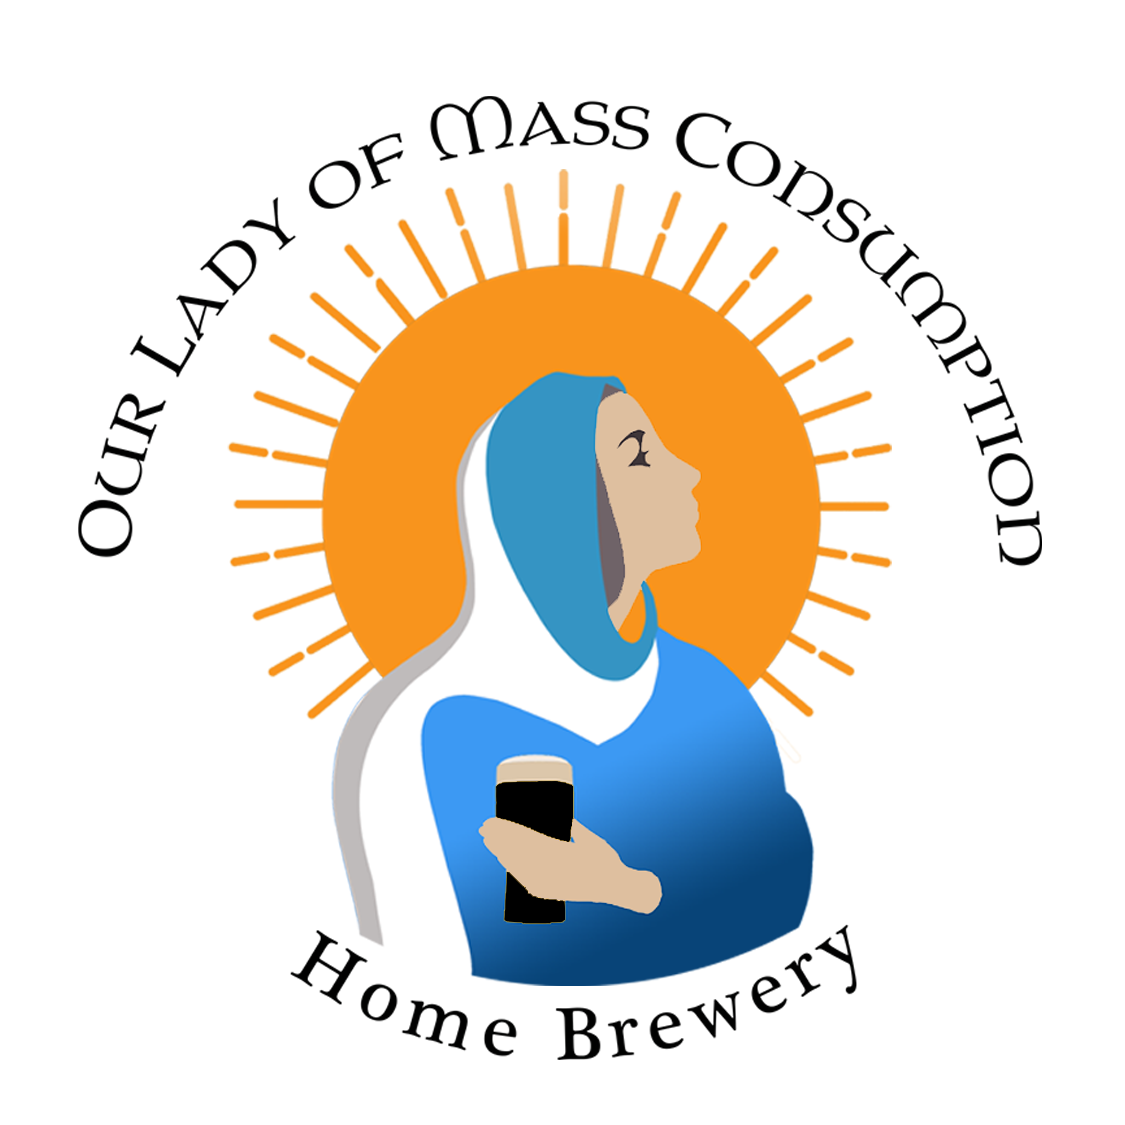 Our Lady of Mass Consumption Home Brewery